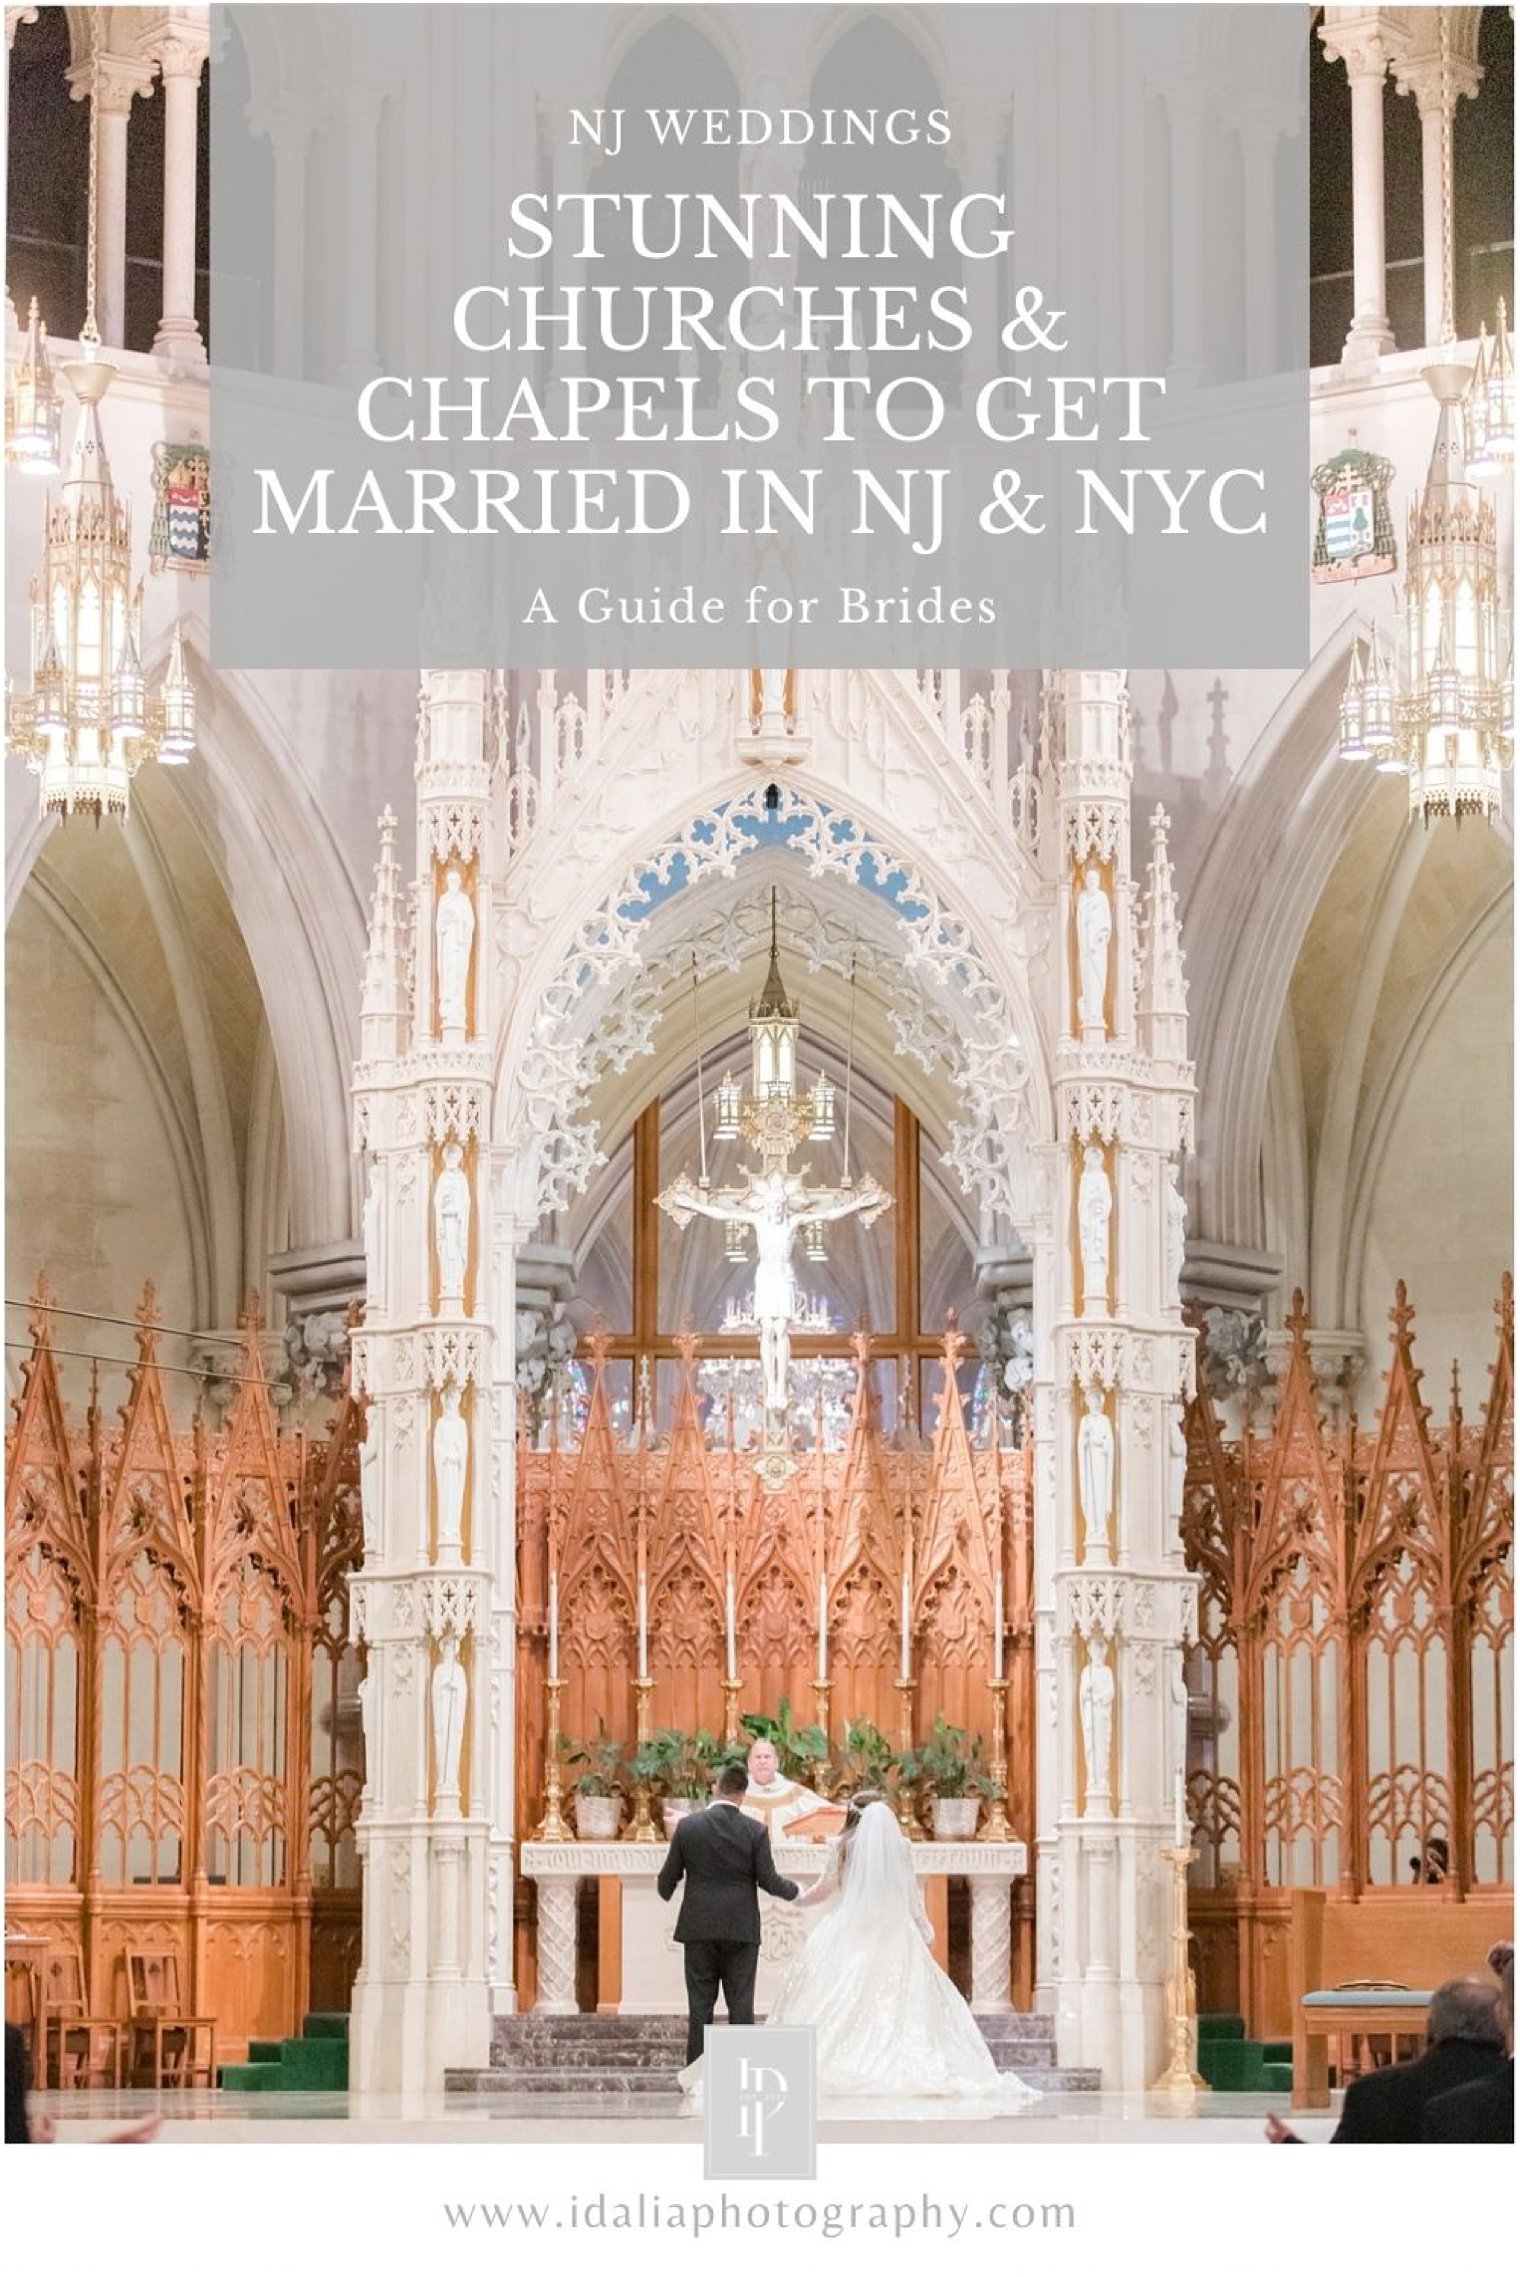 Stunning churches and chapels for a traditional wedding in NJ and NYC